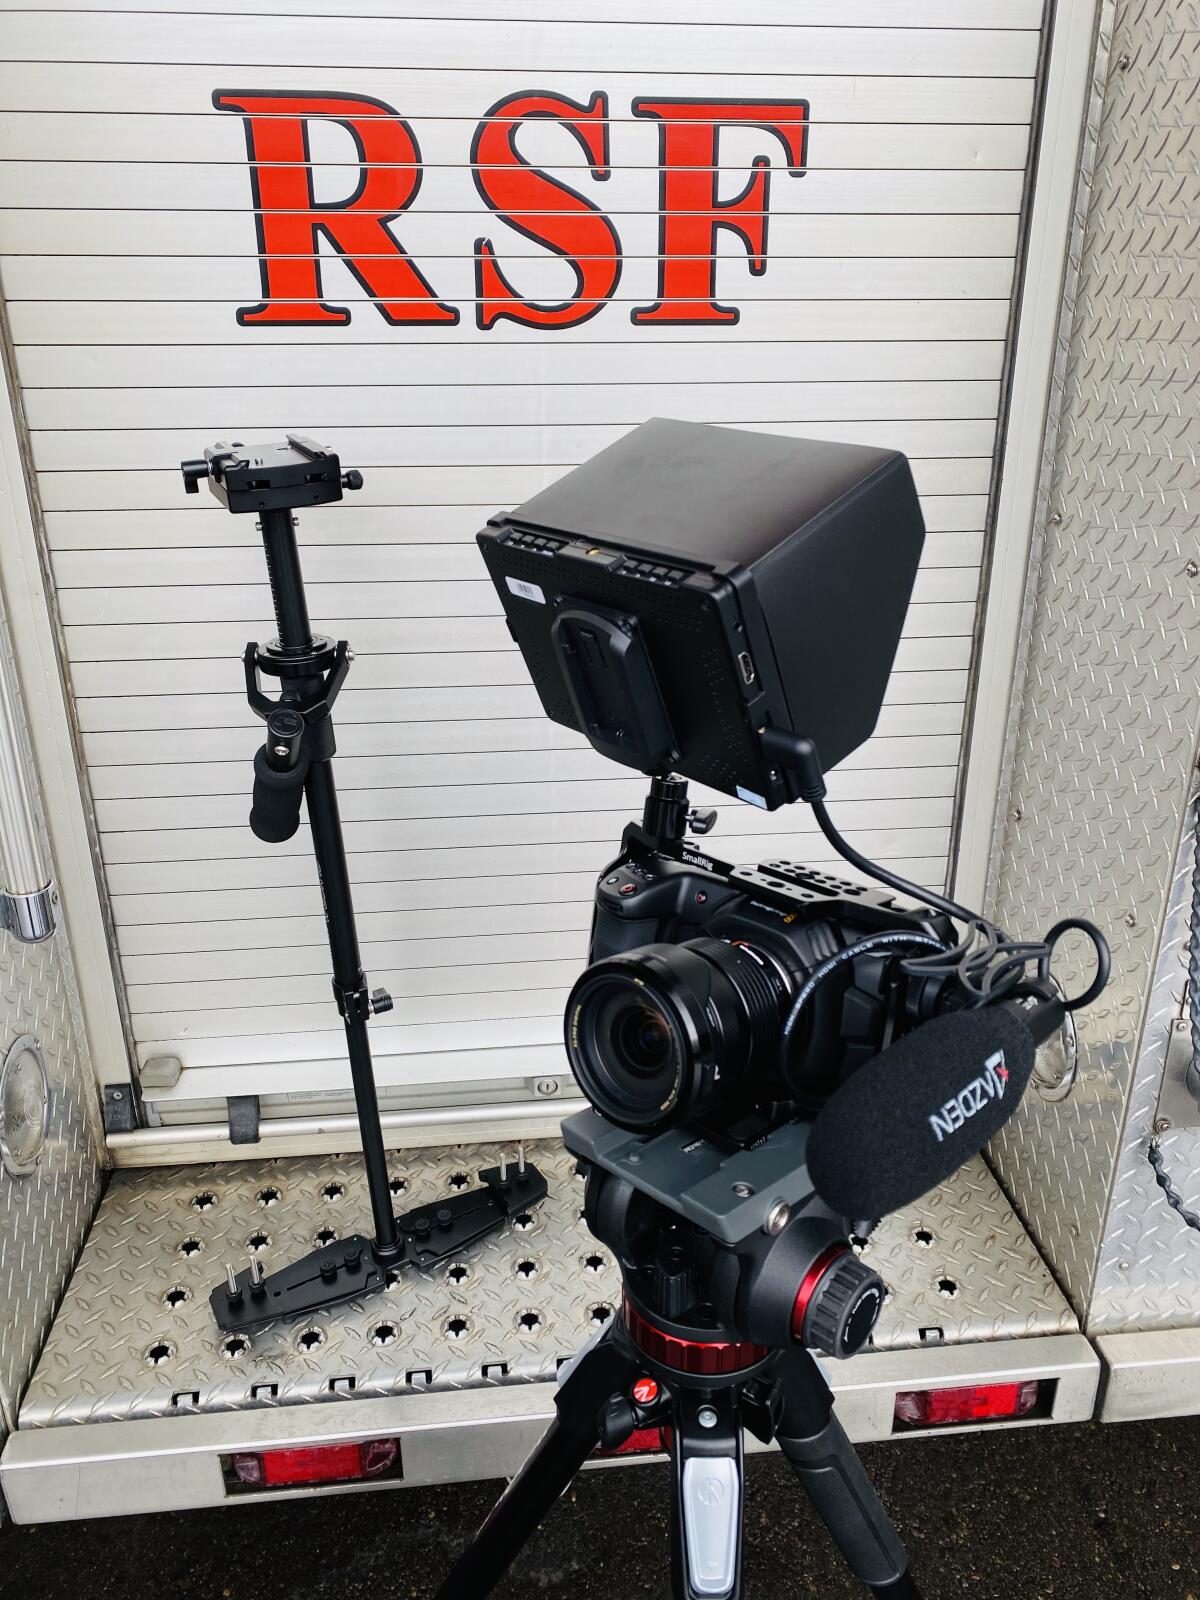 The RSF Fire District Foundation recently donated high-end video equipment to the RSF Fire District.